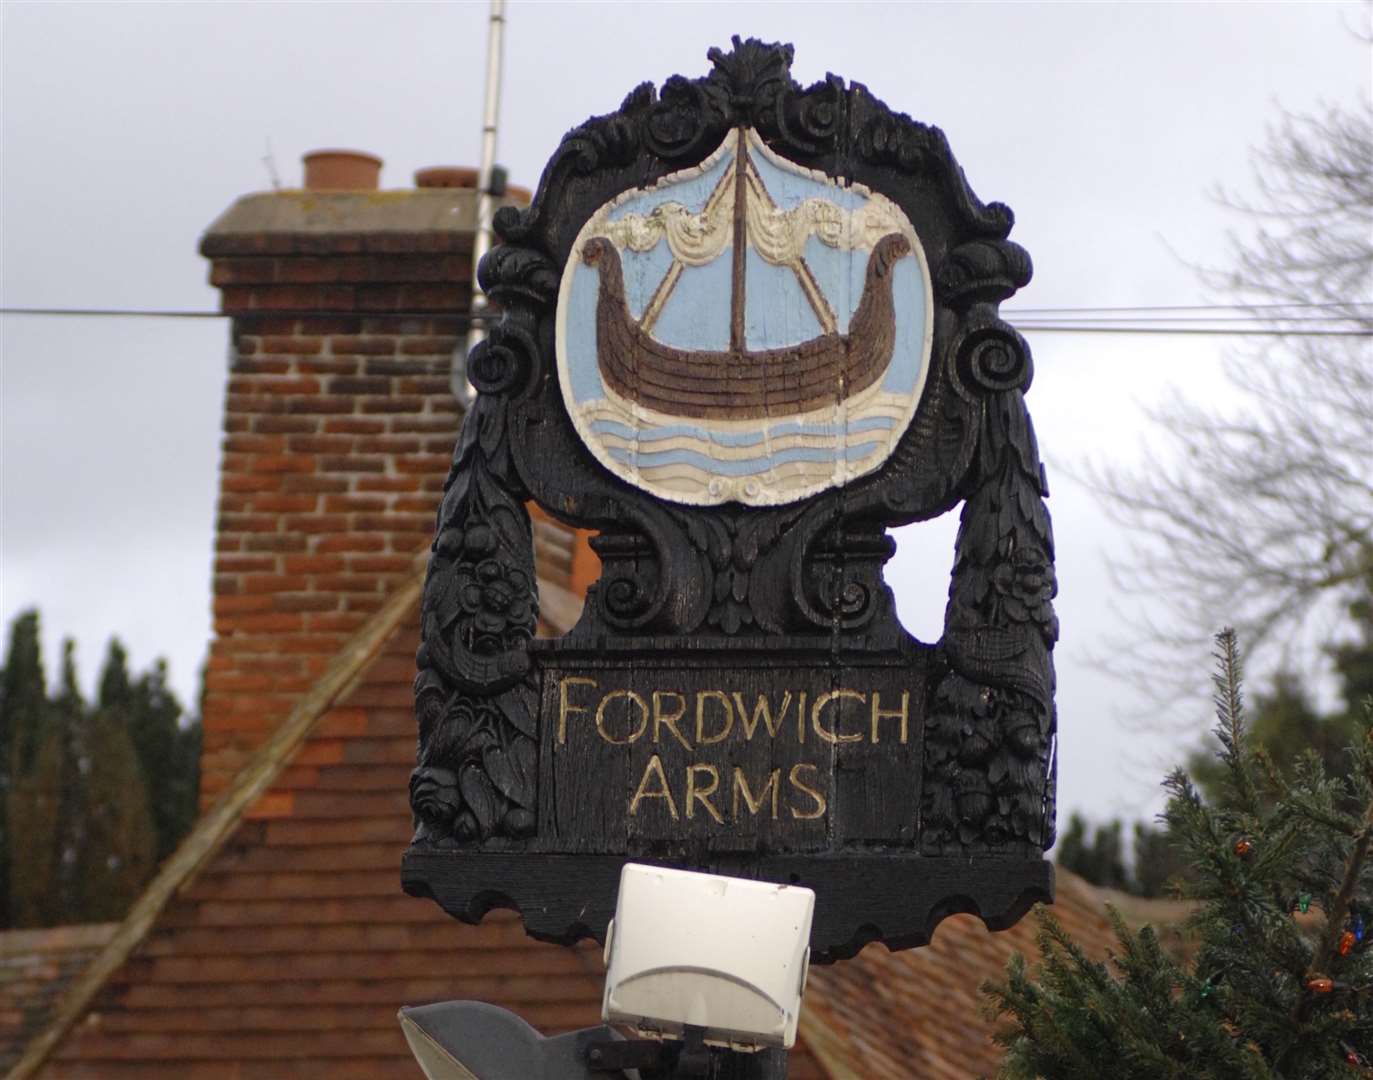 The Fordwich Arms pub came out top for the Kent pubs